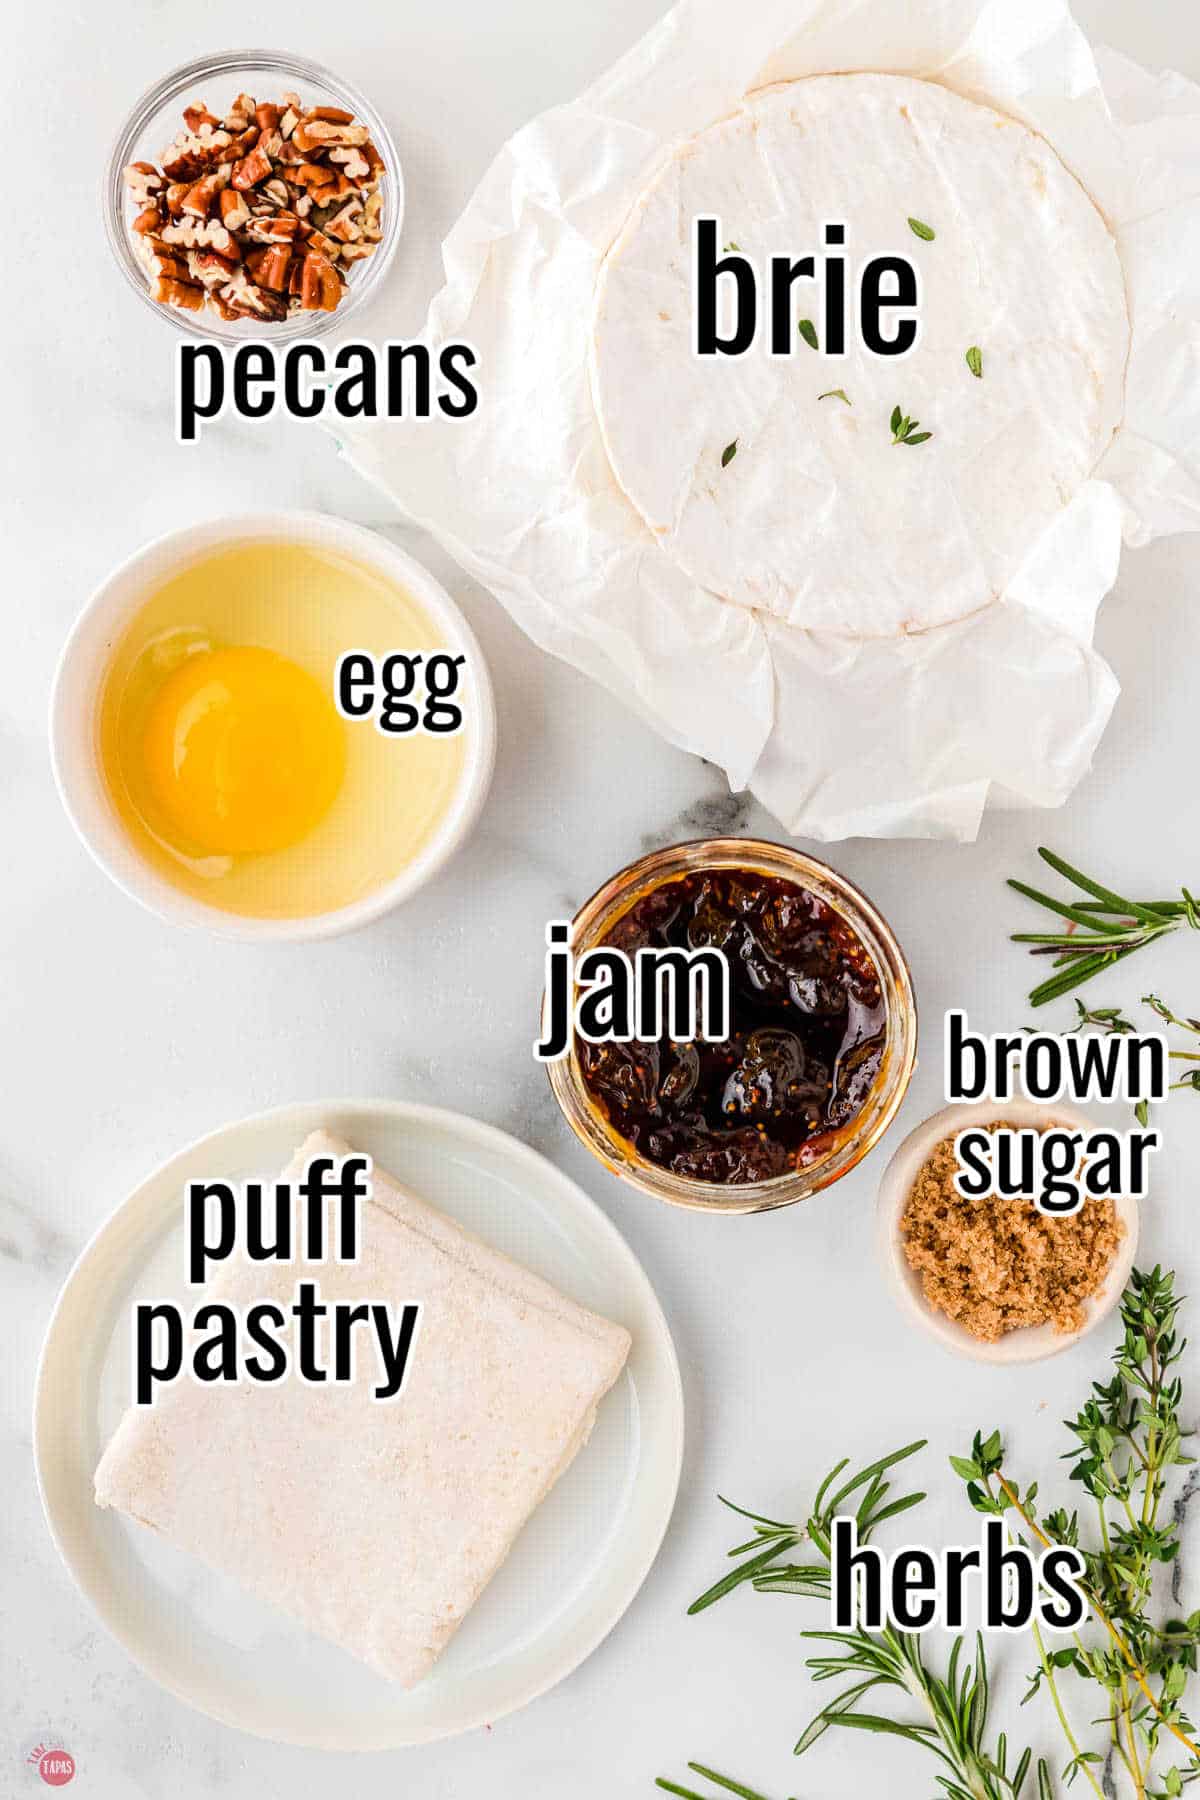 ingredients for a baked brie appetizer